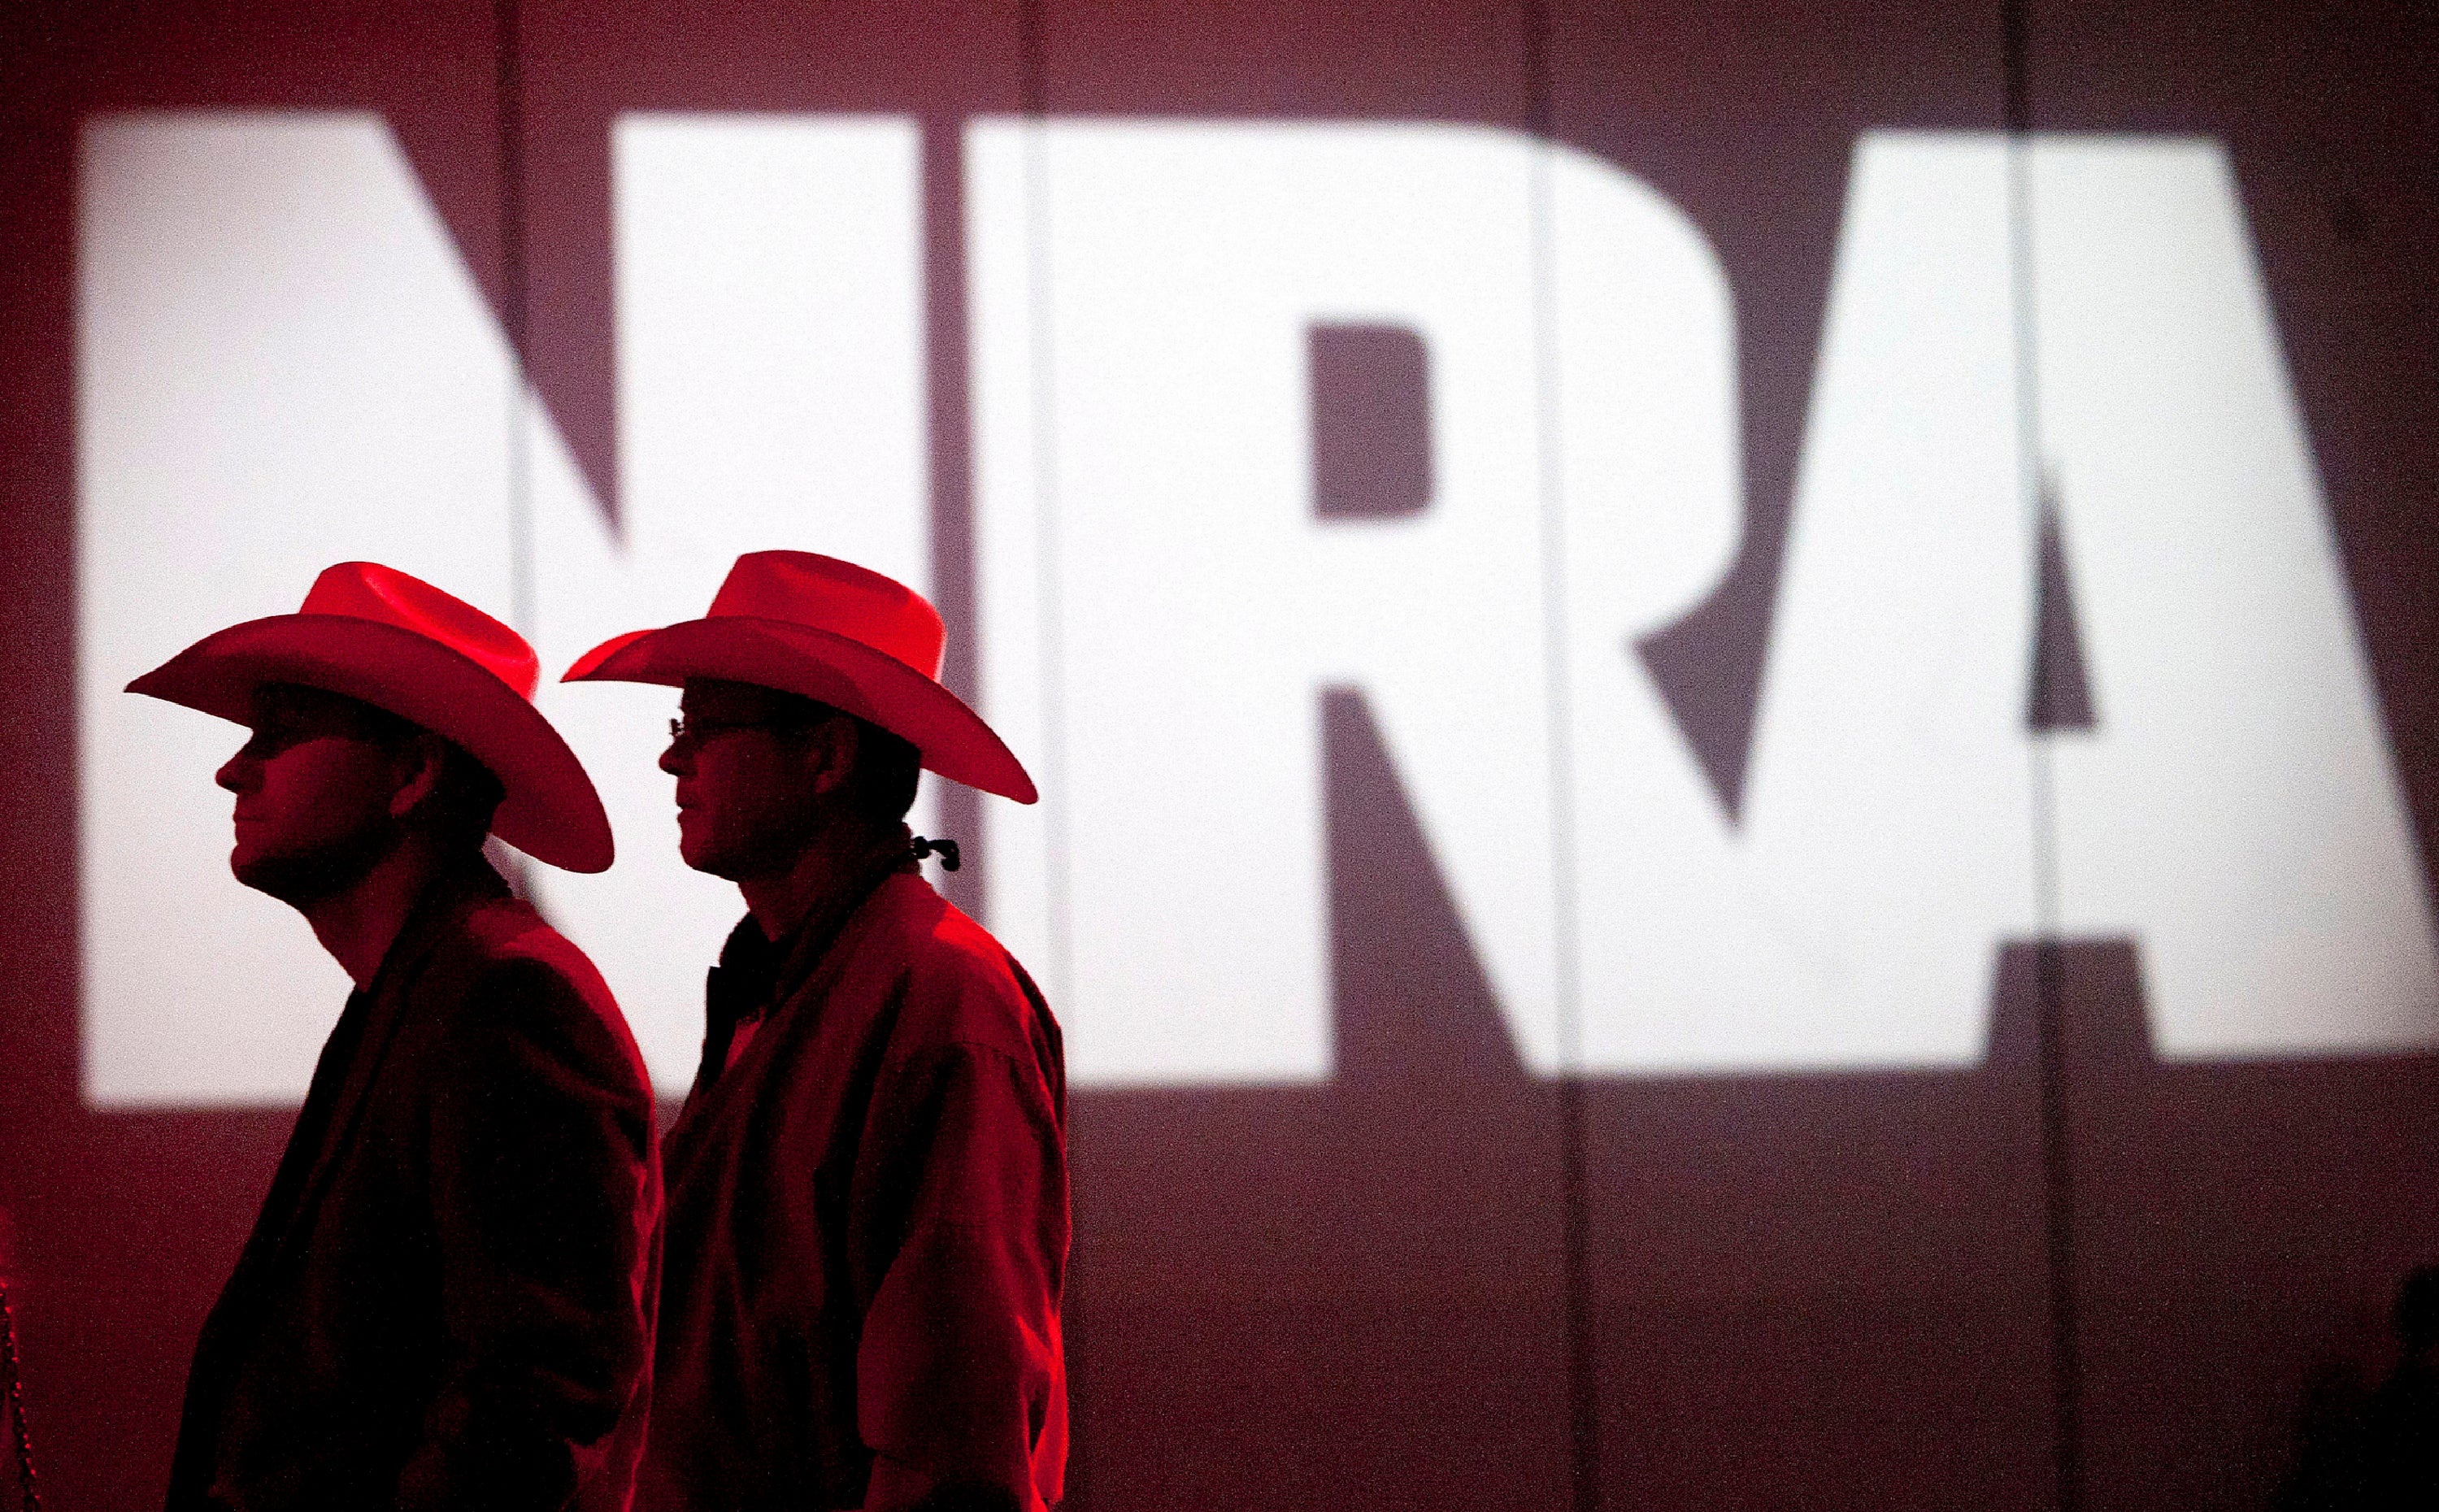 NRA lawyer says gun rights group is defendant and victim at civil trial